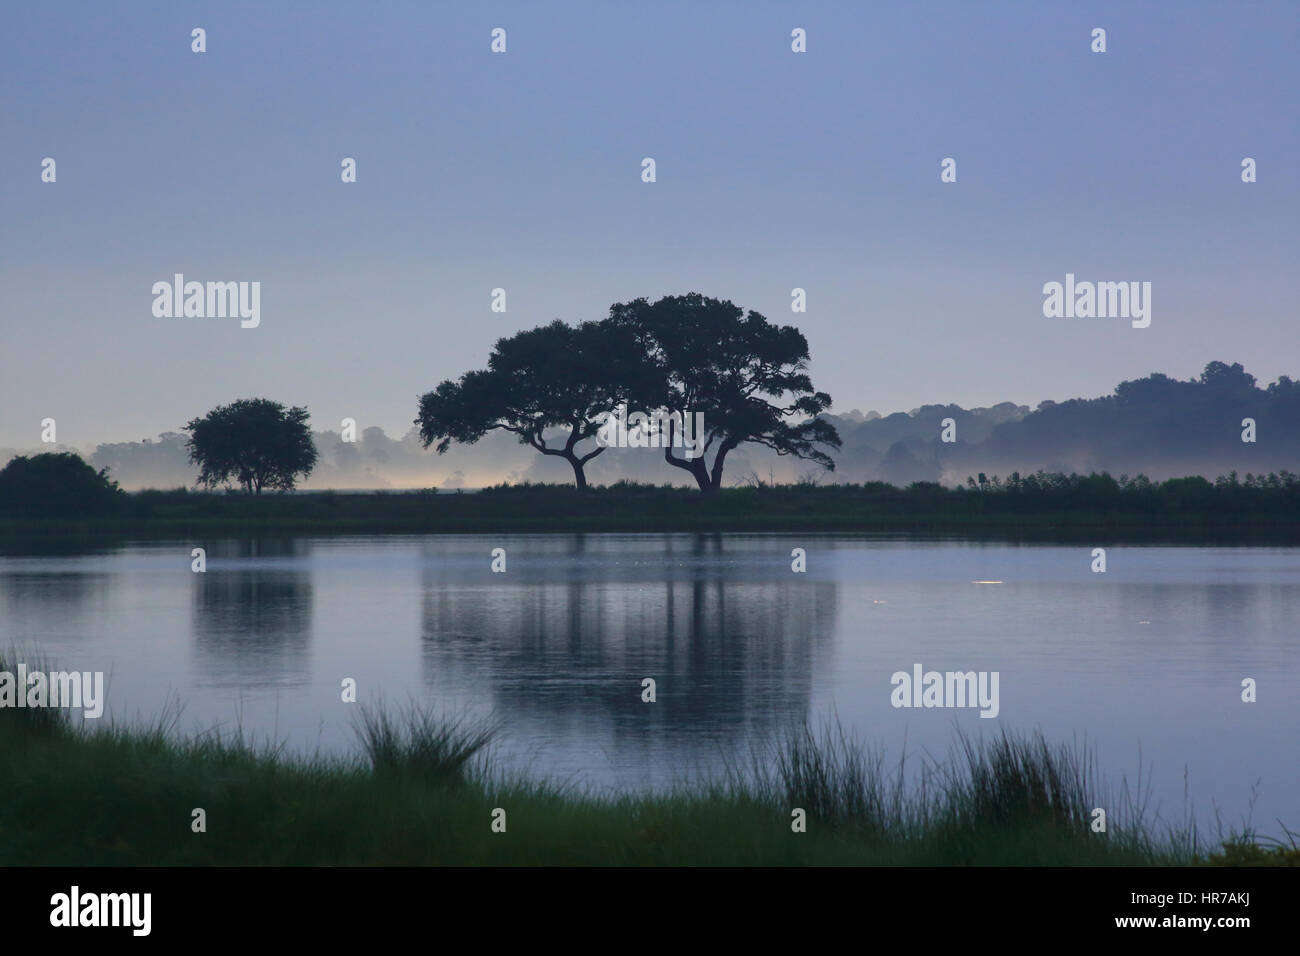 Two Live Oak trees are silhouetted against a soothing blue sky with morning light on Kiawah Island, South Carolina. Bass Pond is in the foreground. Stock Photo